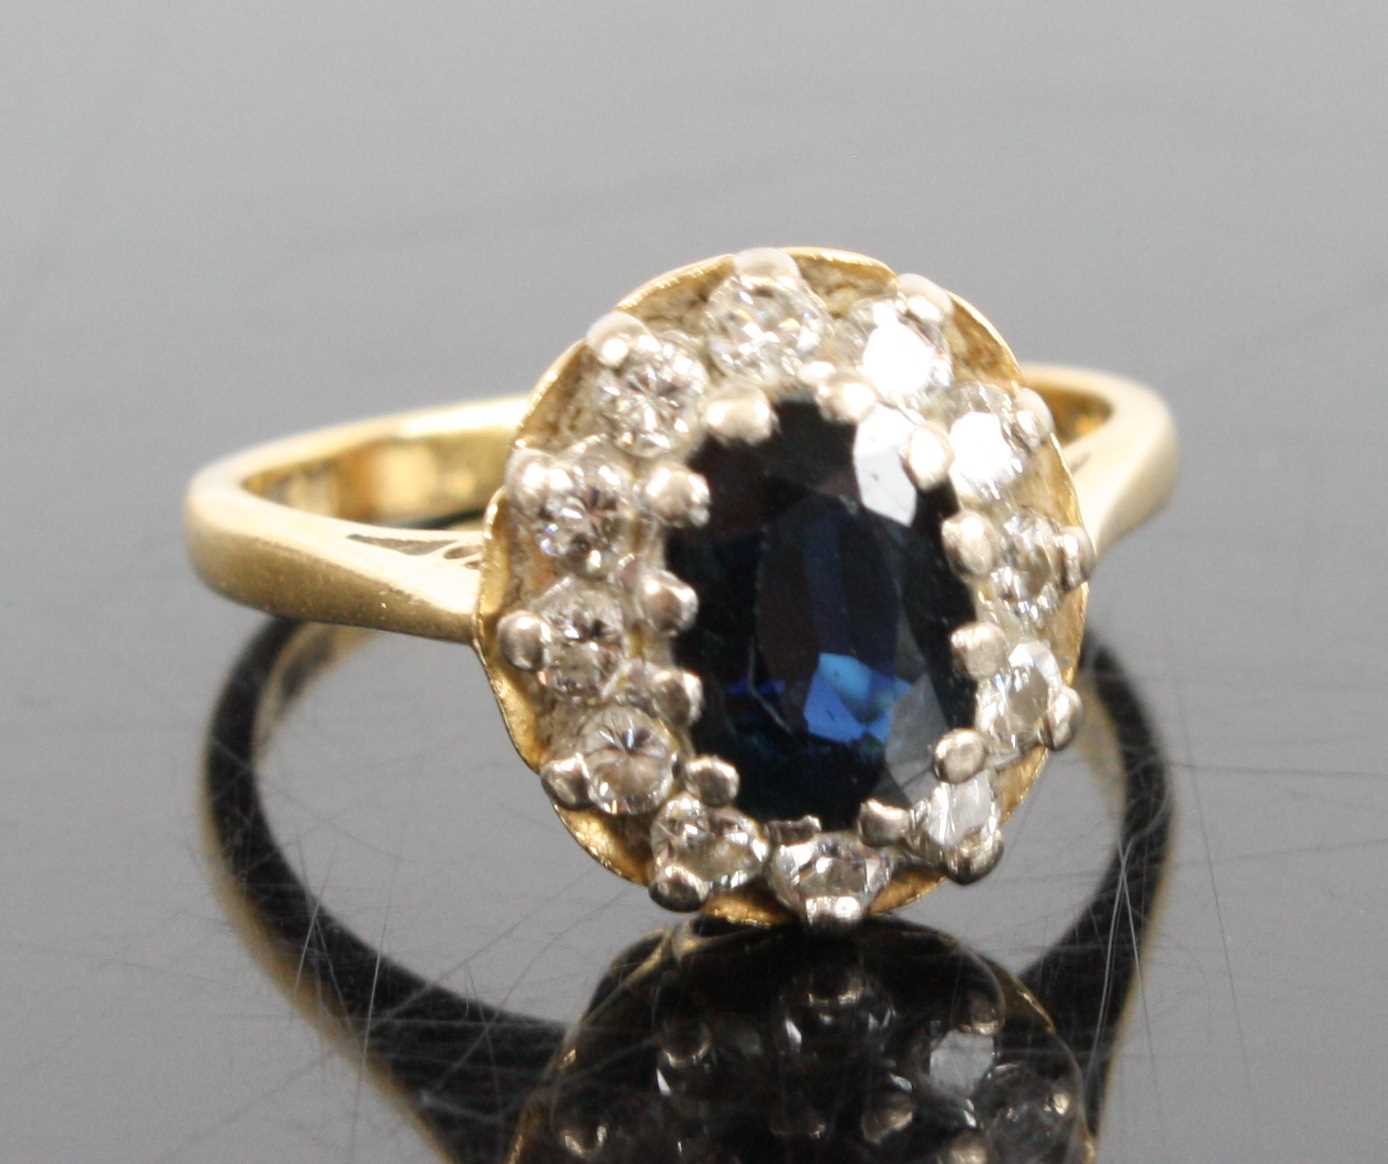 An 18ct yellow and white gold, sapphire and diamond oval cluster ring, featuring a centre oval